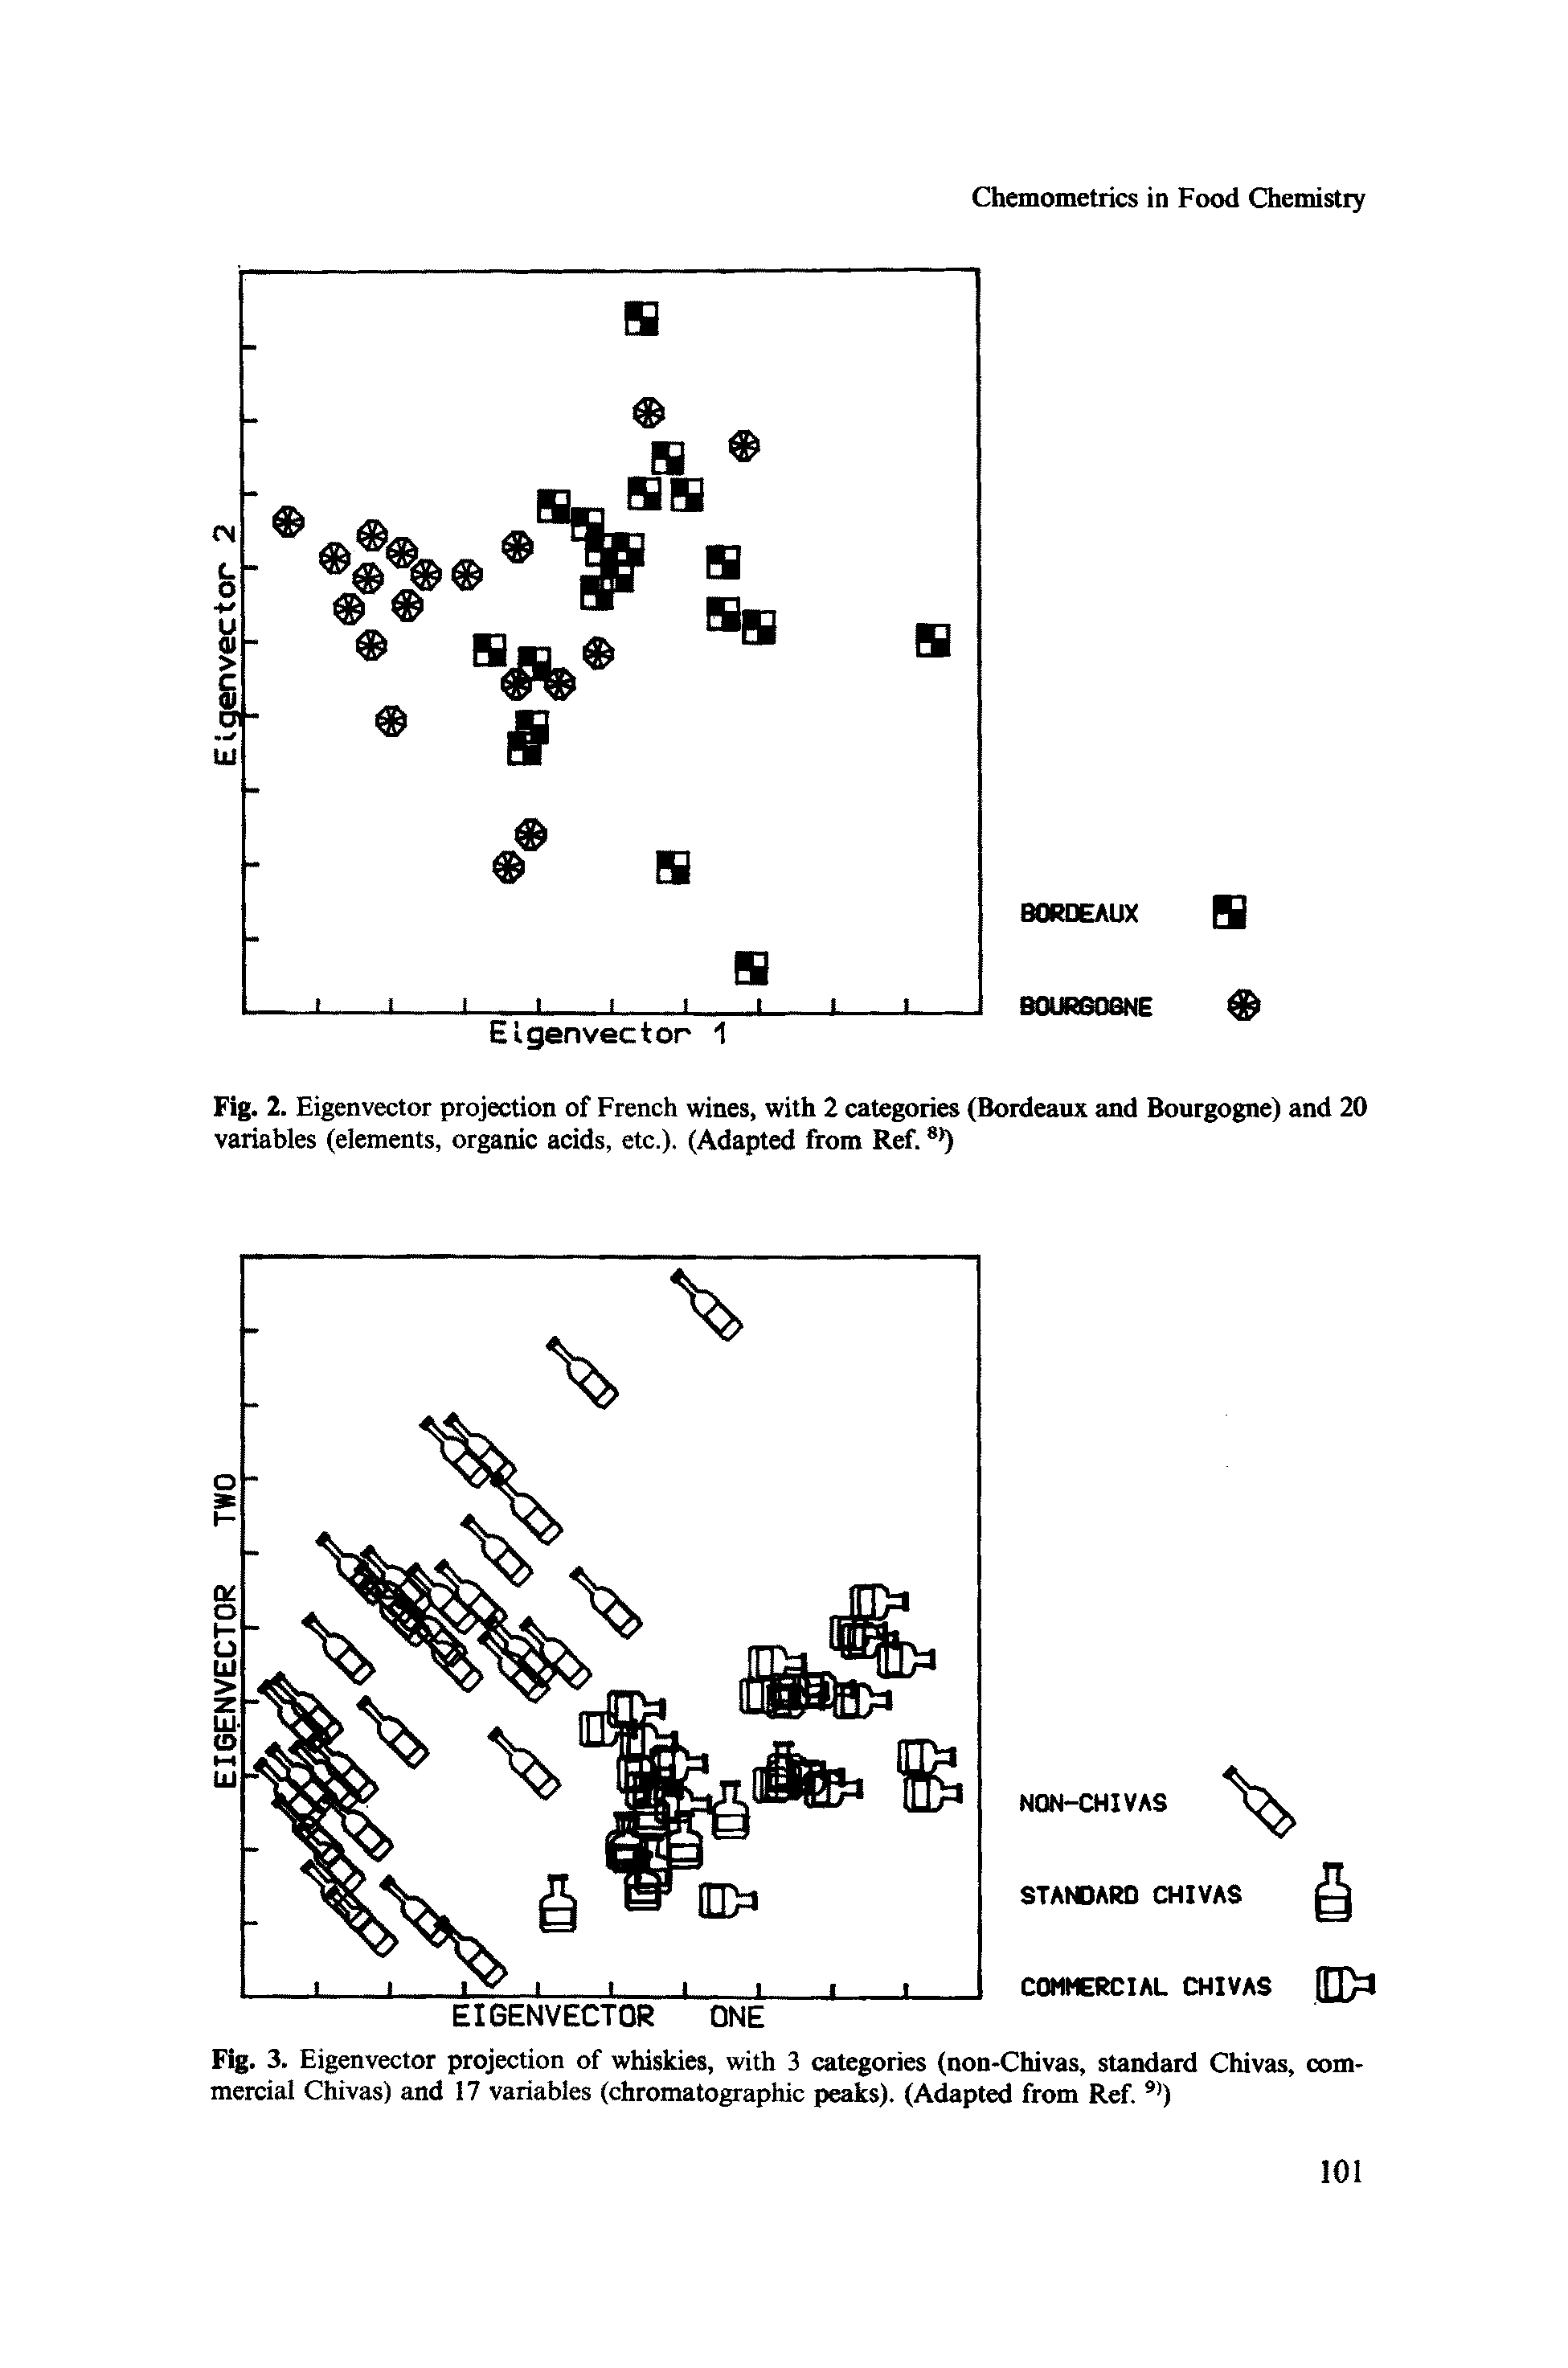 Fig. 2. Eigenvector projection of French wines, with 2 categories (Bordeaux and Bourgogne) and 20 variables (elements, organic acids, etc.). (Adapted from Ref. >)...